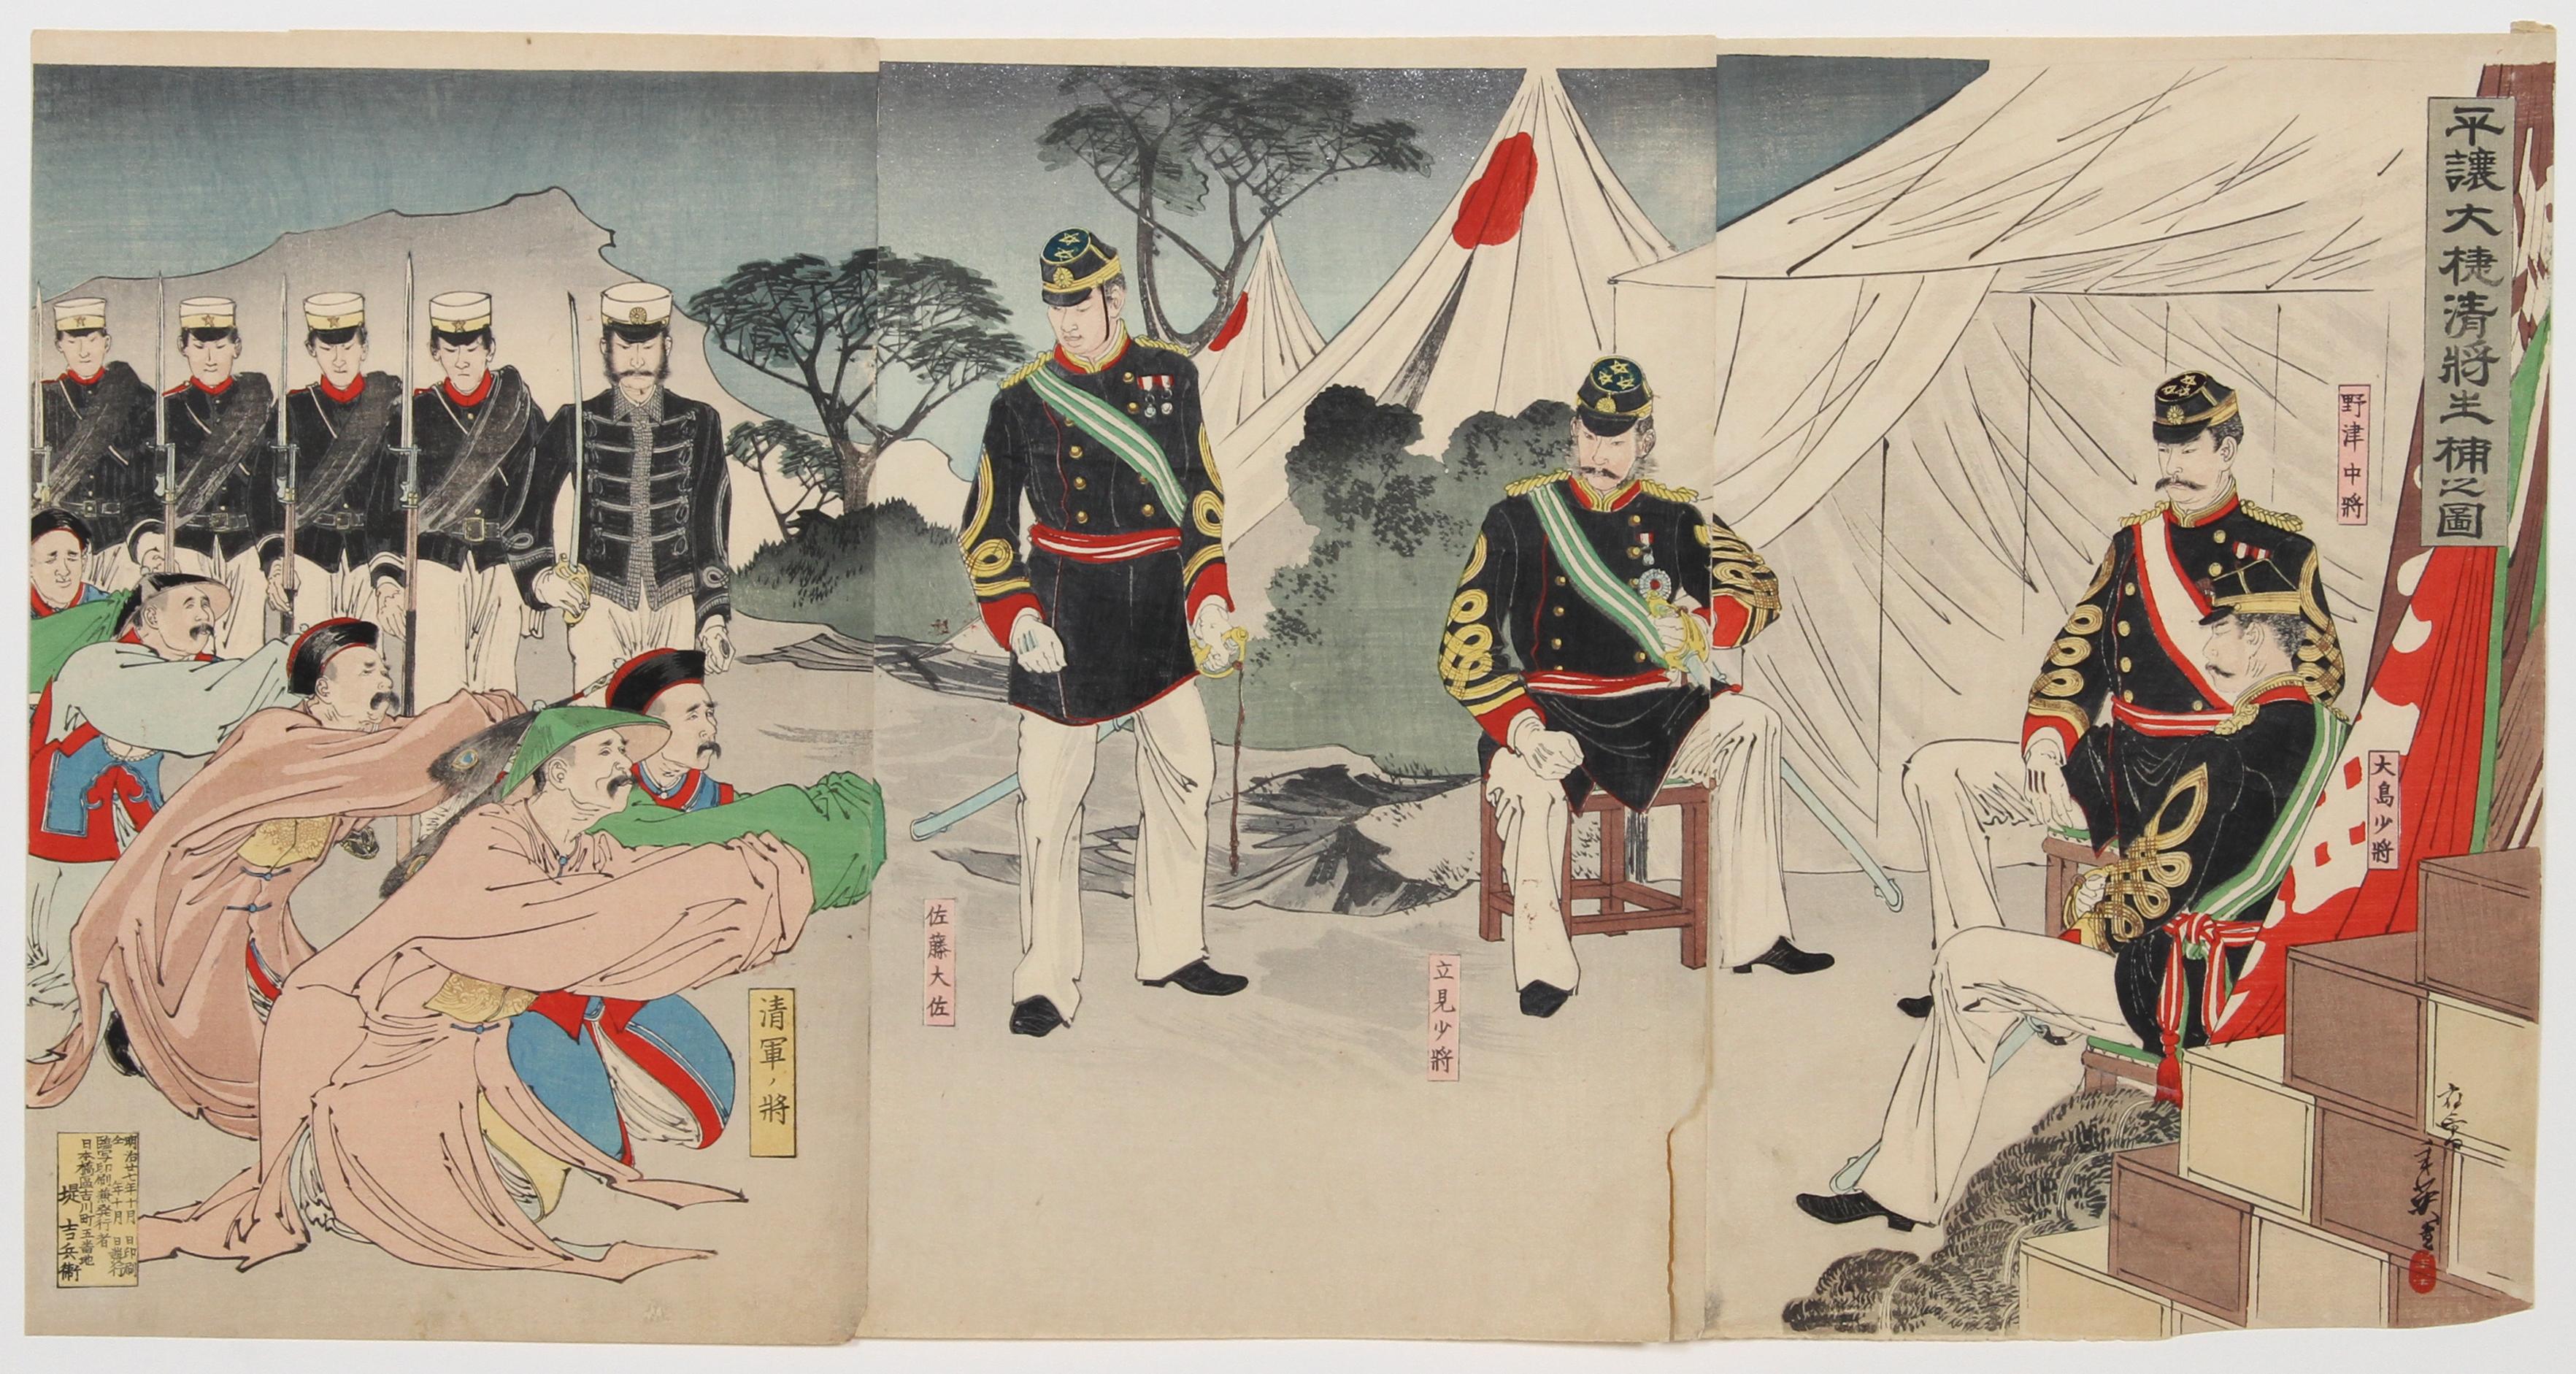 Artist: Migita Toshihide, Japanese (1862 - 1925)
Title: Chinese Generals in Pyongyang Surrender to Japanese
Year: 1892 
Medium: Woodblock Triptych
Size: 14.5 in. x 28 in. (36.83 cm x 71.12 cm)